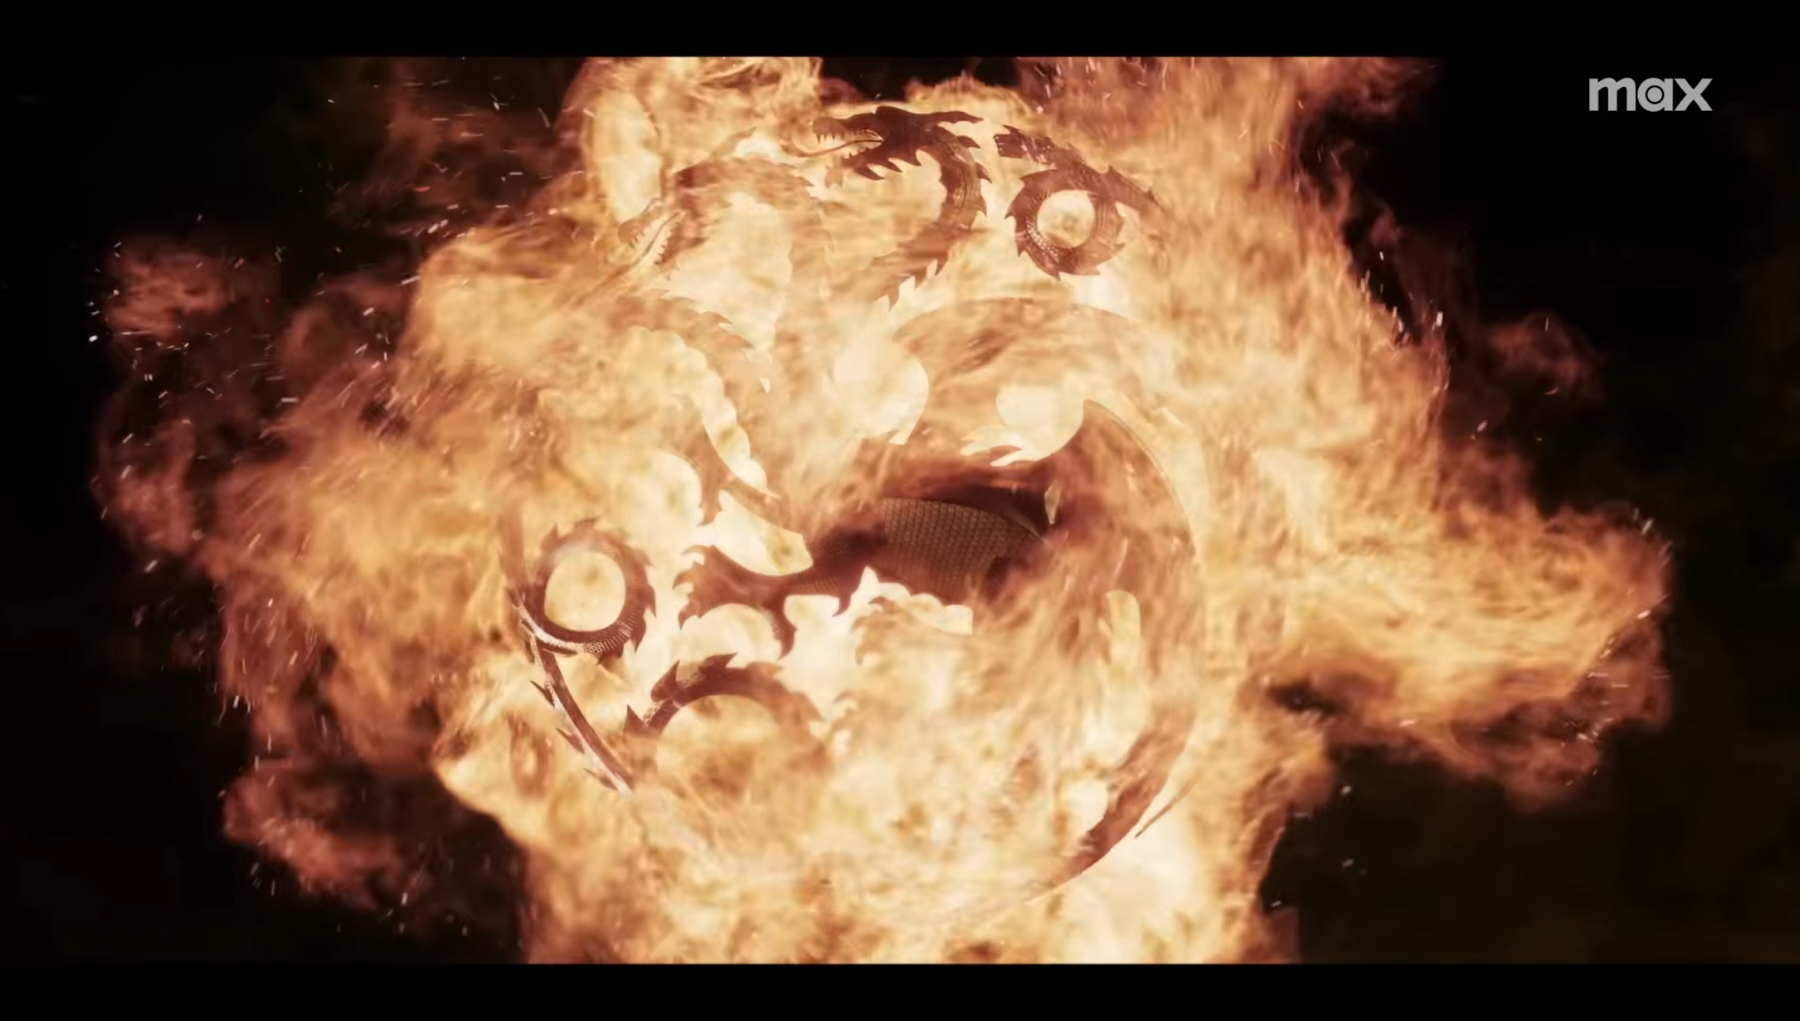 A fiery visual effect resembling a face, with elements that suggest eyes and a mouth within the flames. The word “max” appears in the top right corner, indicating branding or watermark.